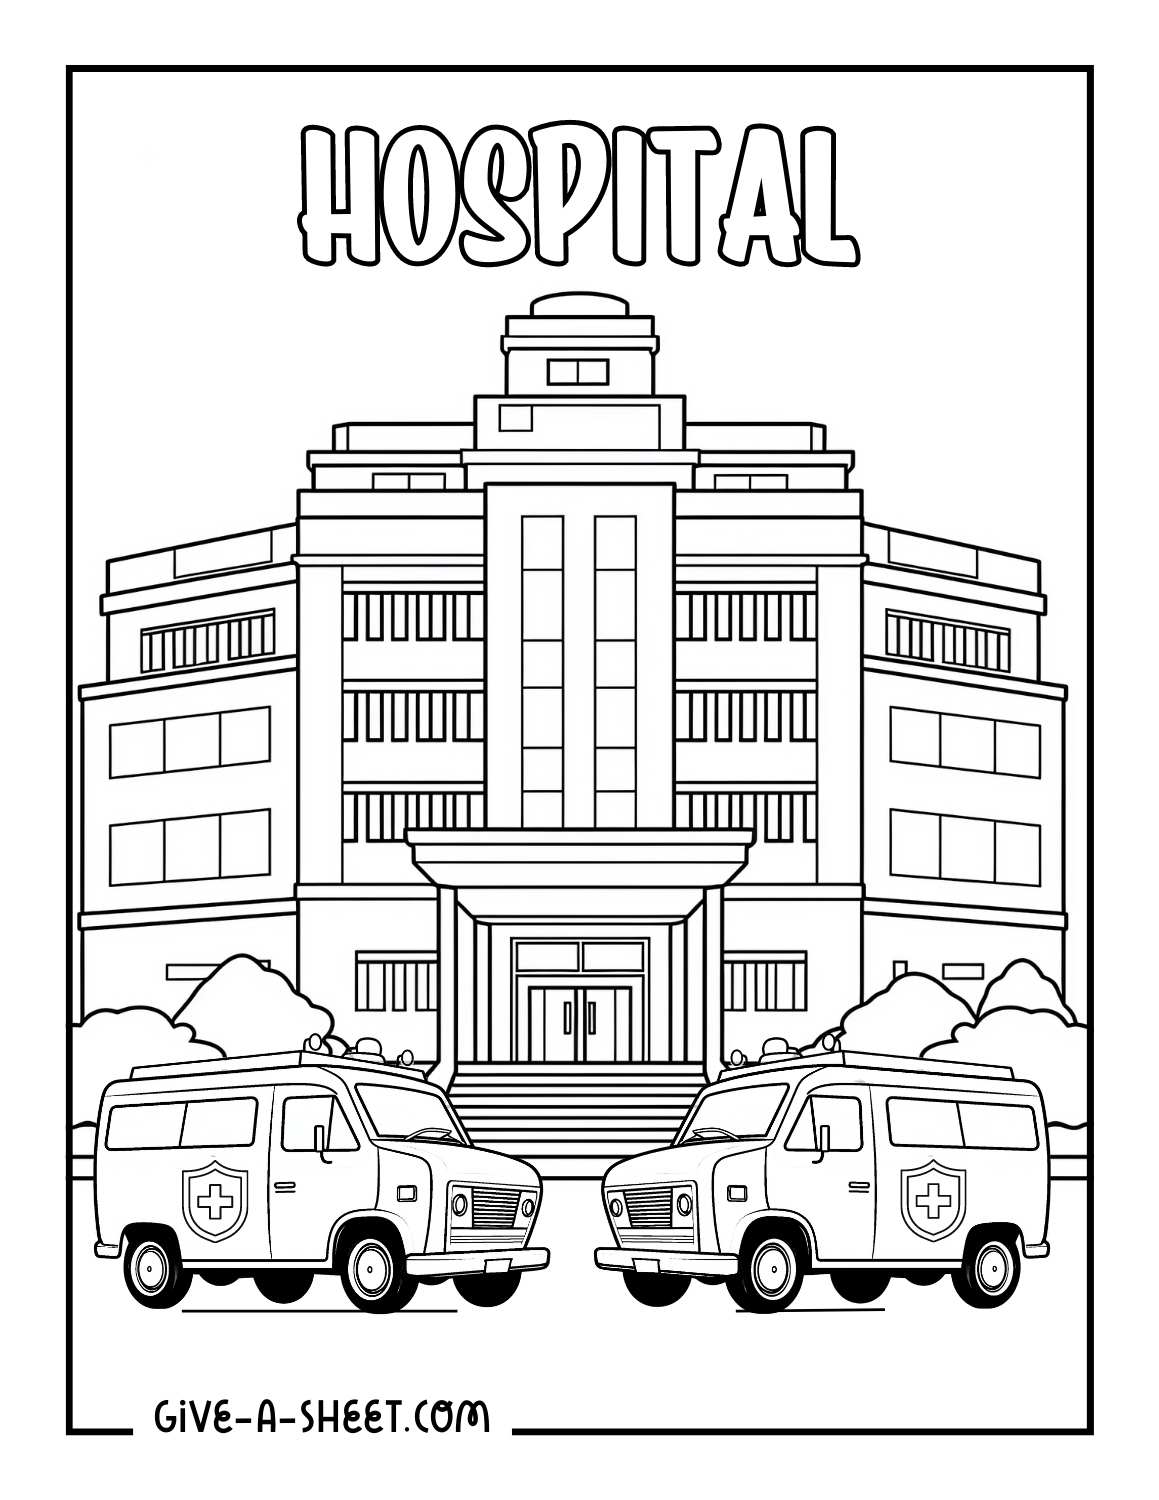 Line art drawing of a hospital. 